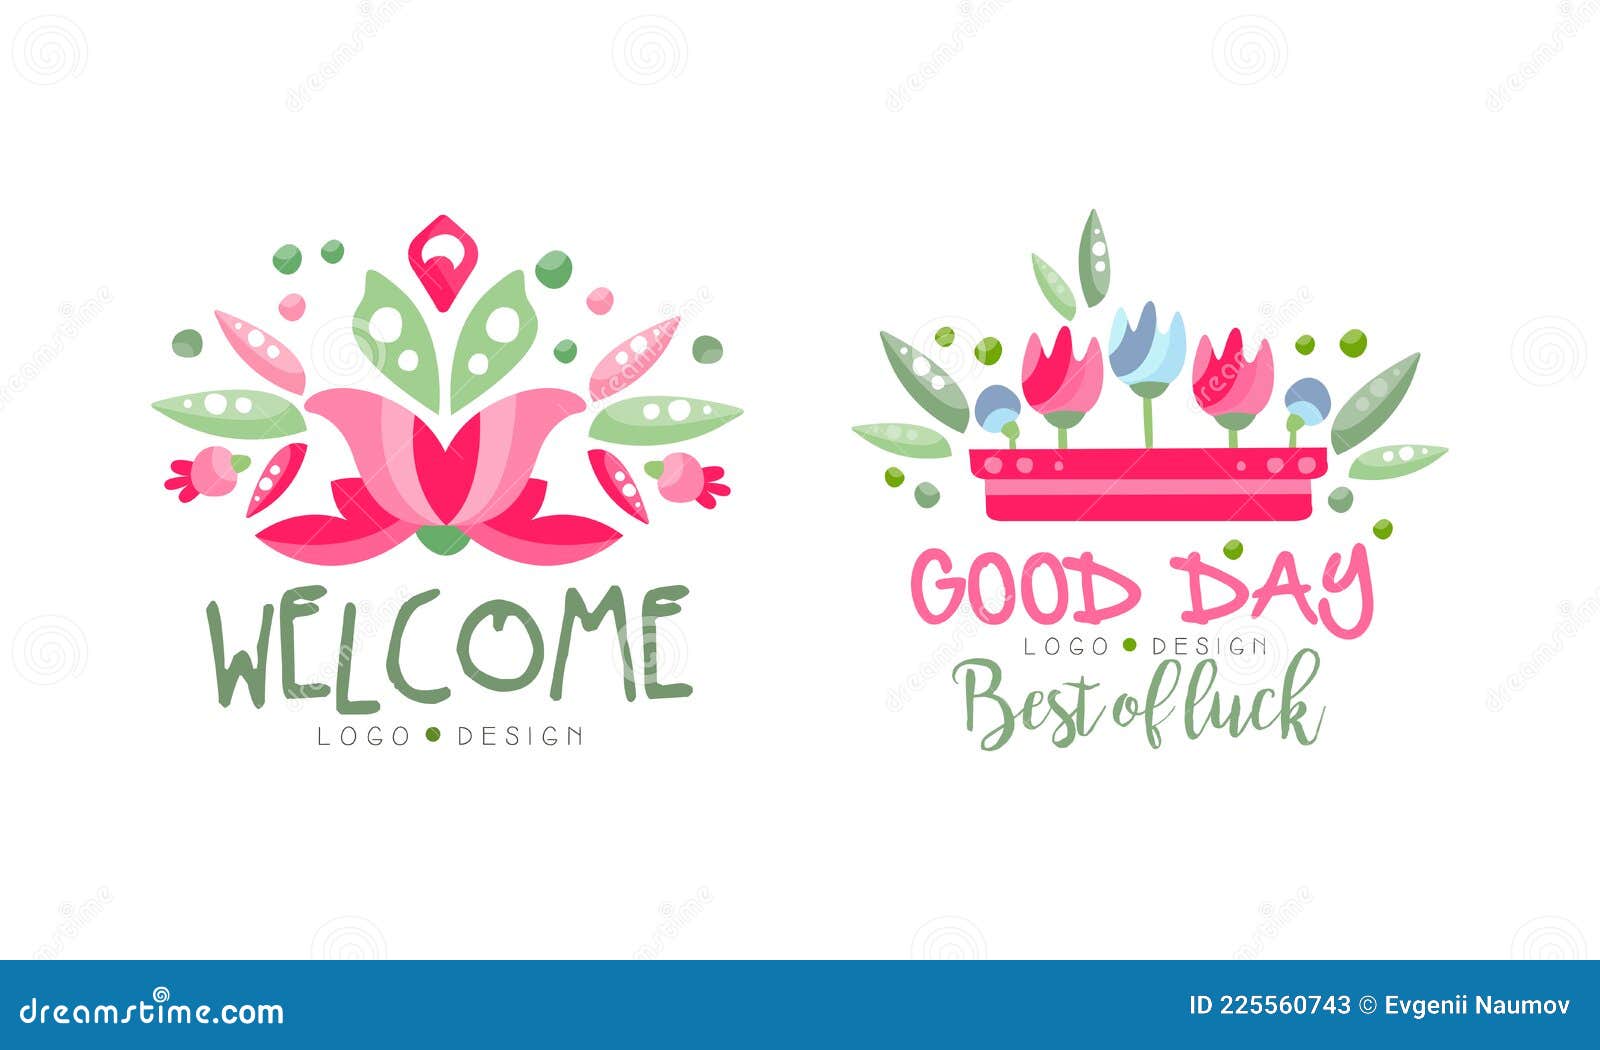 Welcome PNG, Transparent Welcome Logo, Hand Images Free Download - Free  Transparent PNG Logos